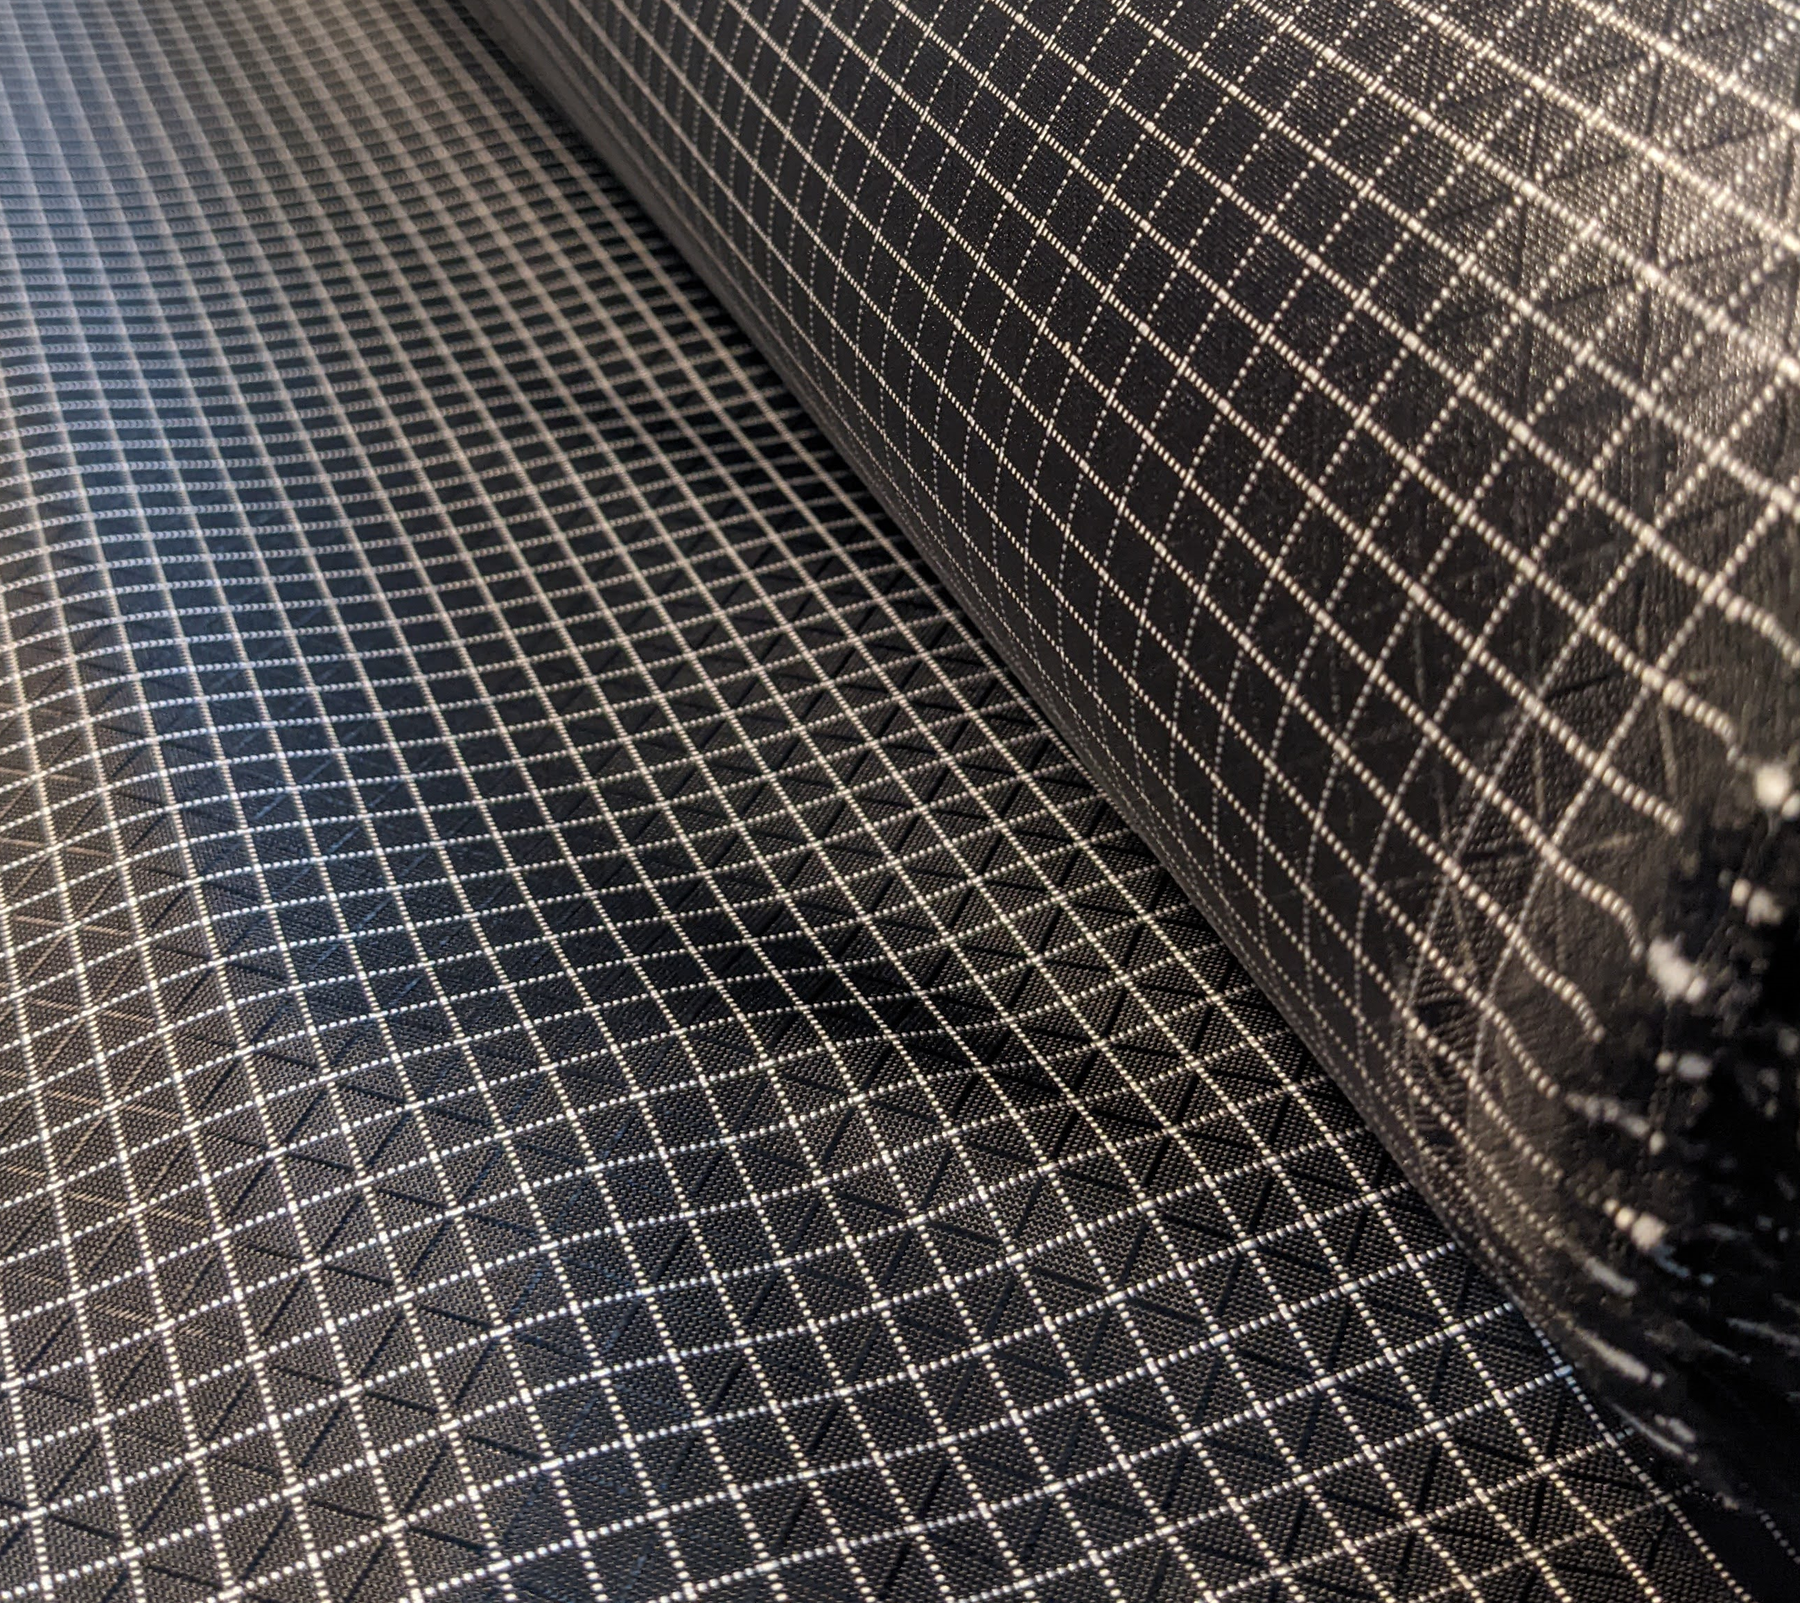 Black 210d UHMWPE Gridstop with Nylon 6.6 is some of the strongest gridstop fabric available on the market! This fabric is a step up from Ripstop By The Roll's 210d HDPE Gridstop, Robic Extreema Gridstop and is similar to Dyneema Gridstop. This fabric is waterproof with a DWR face and PU coating backside. If you want quality ripstop fabric, try this!